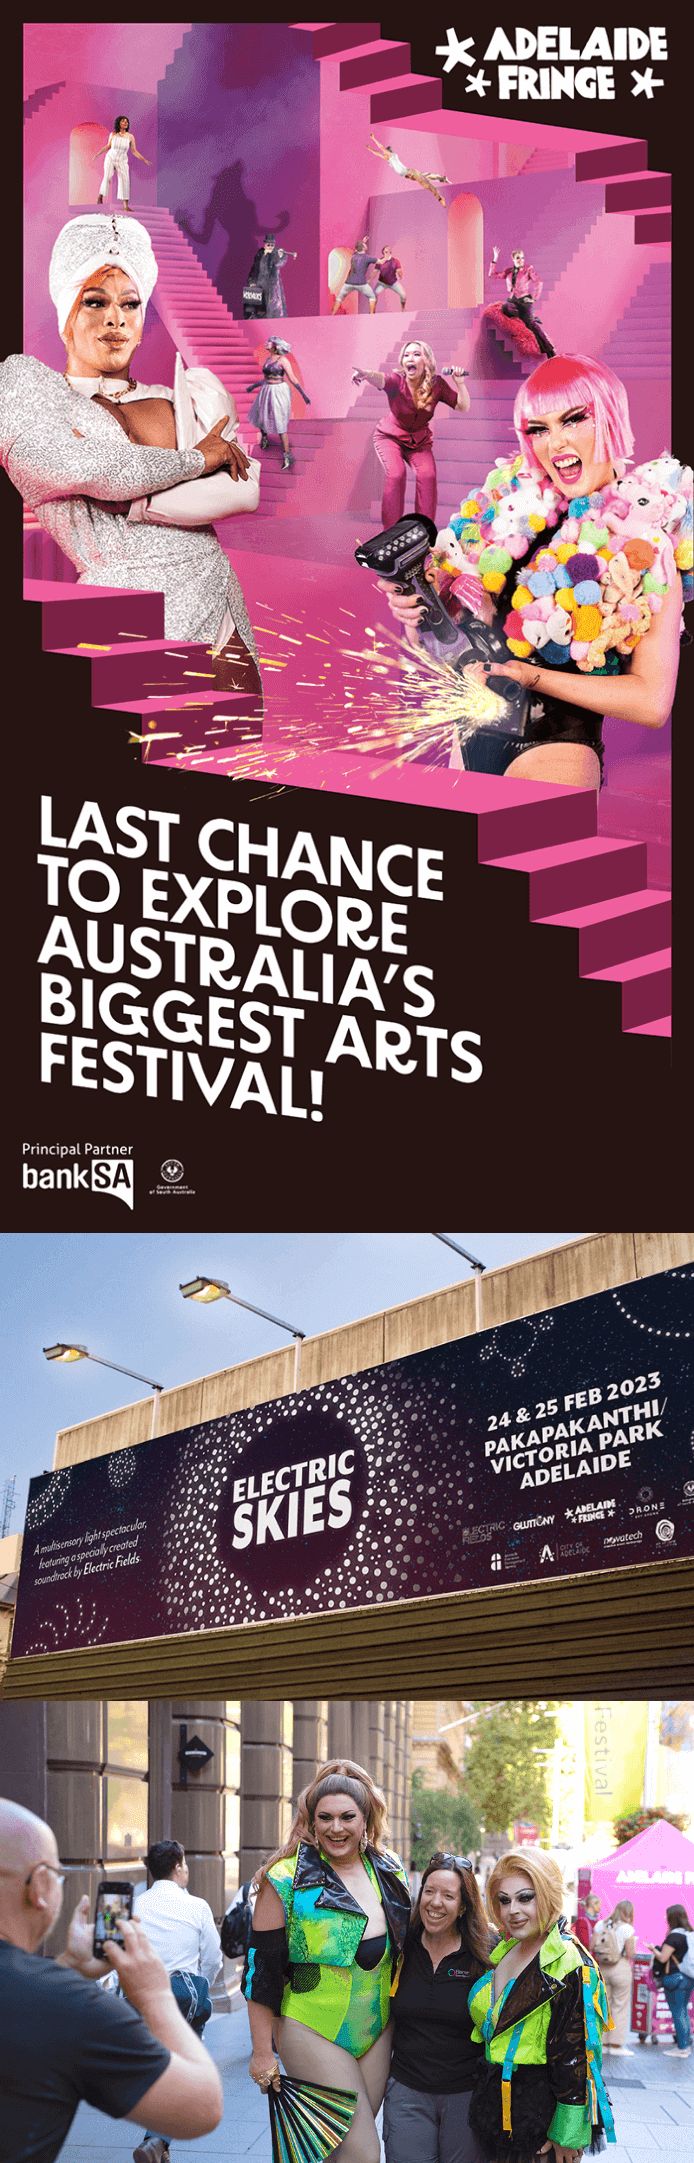 Print and display advertisement for Adelaide Fringe